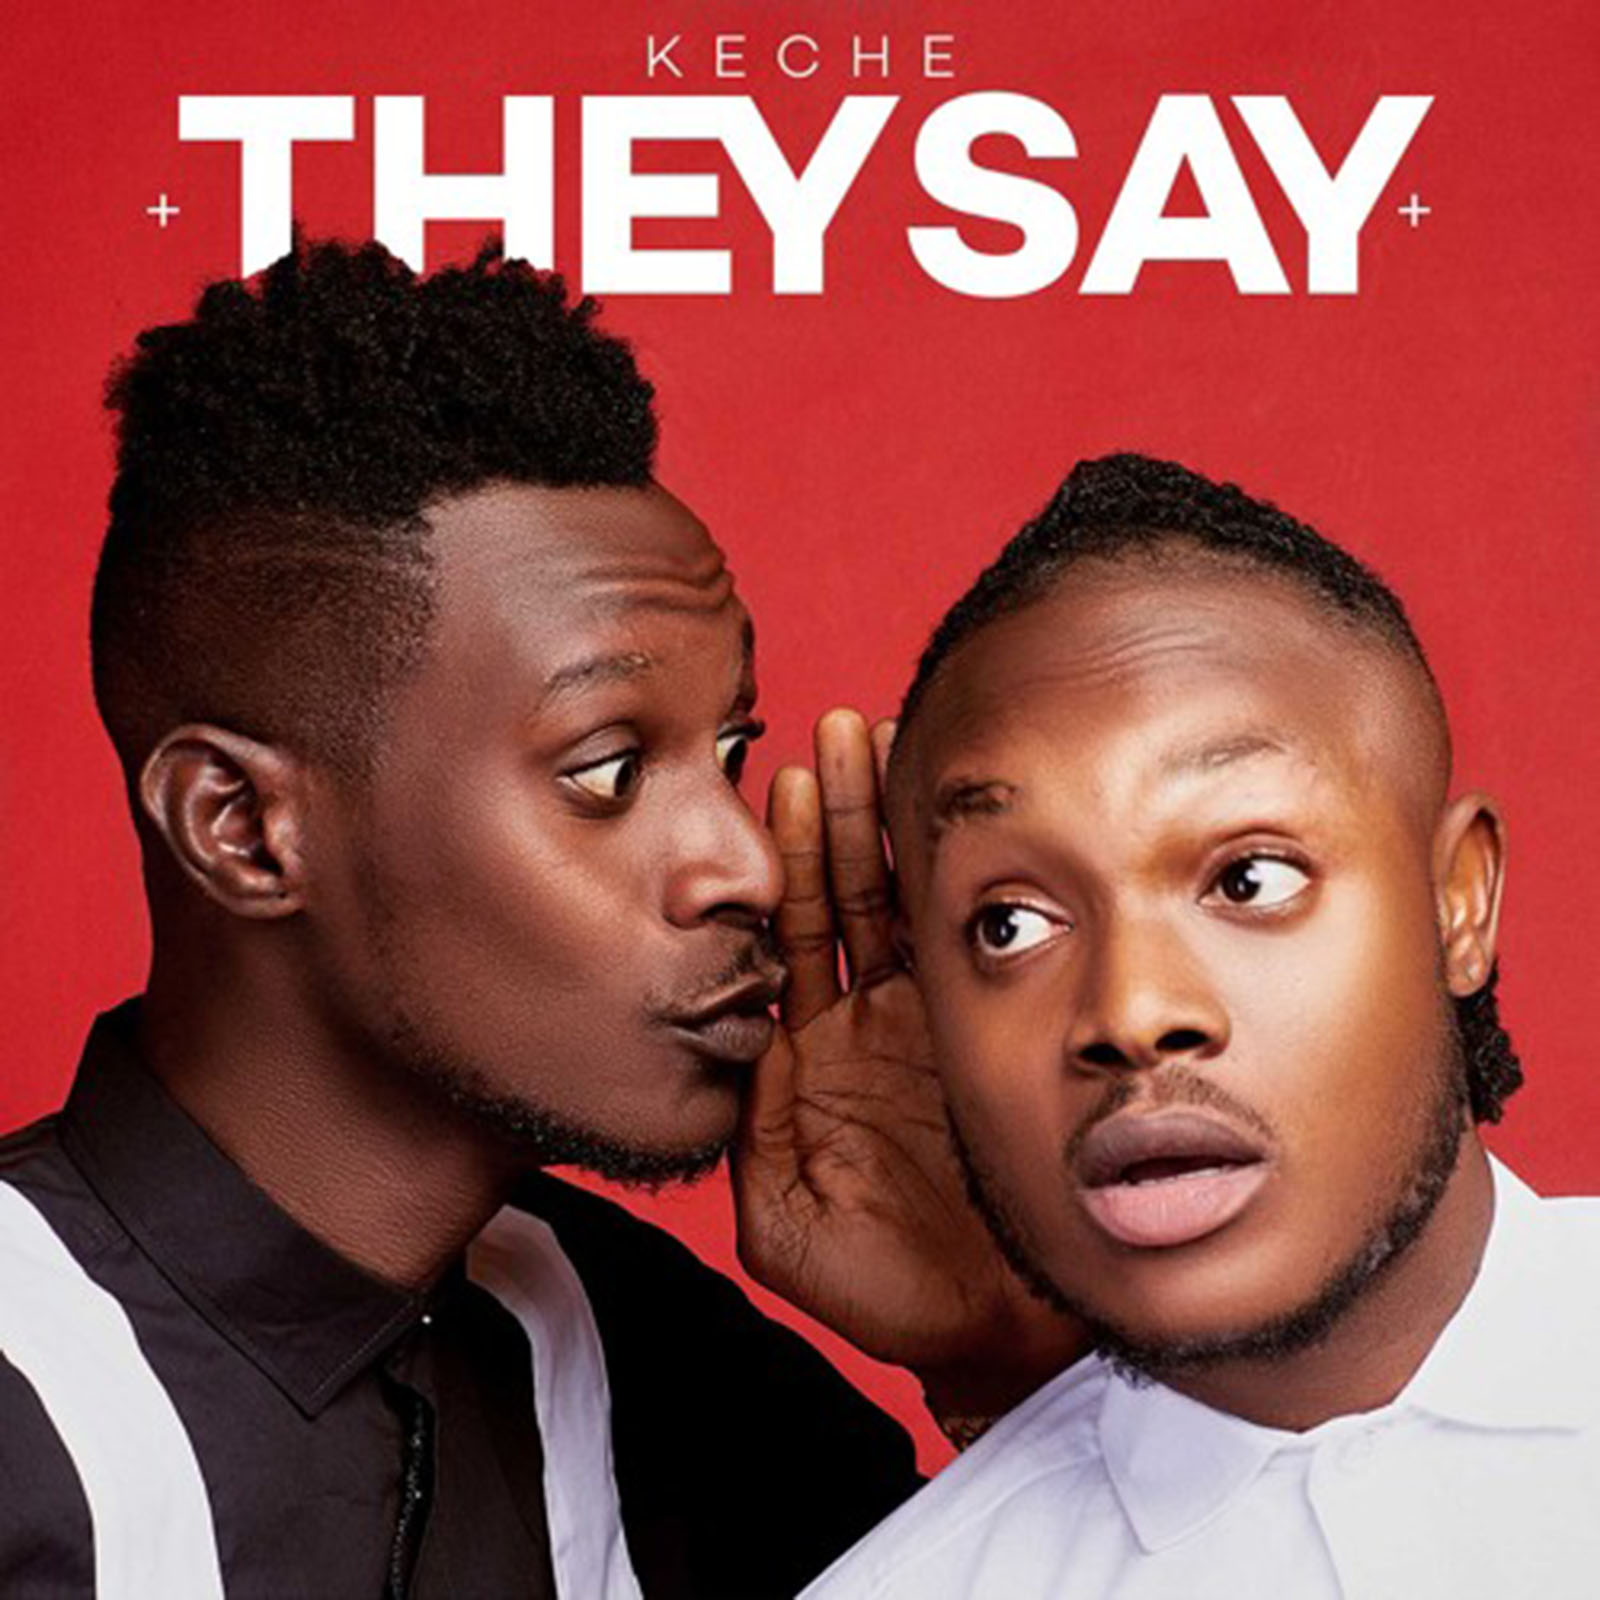 They Say by Keche